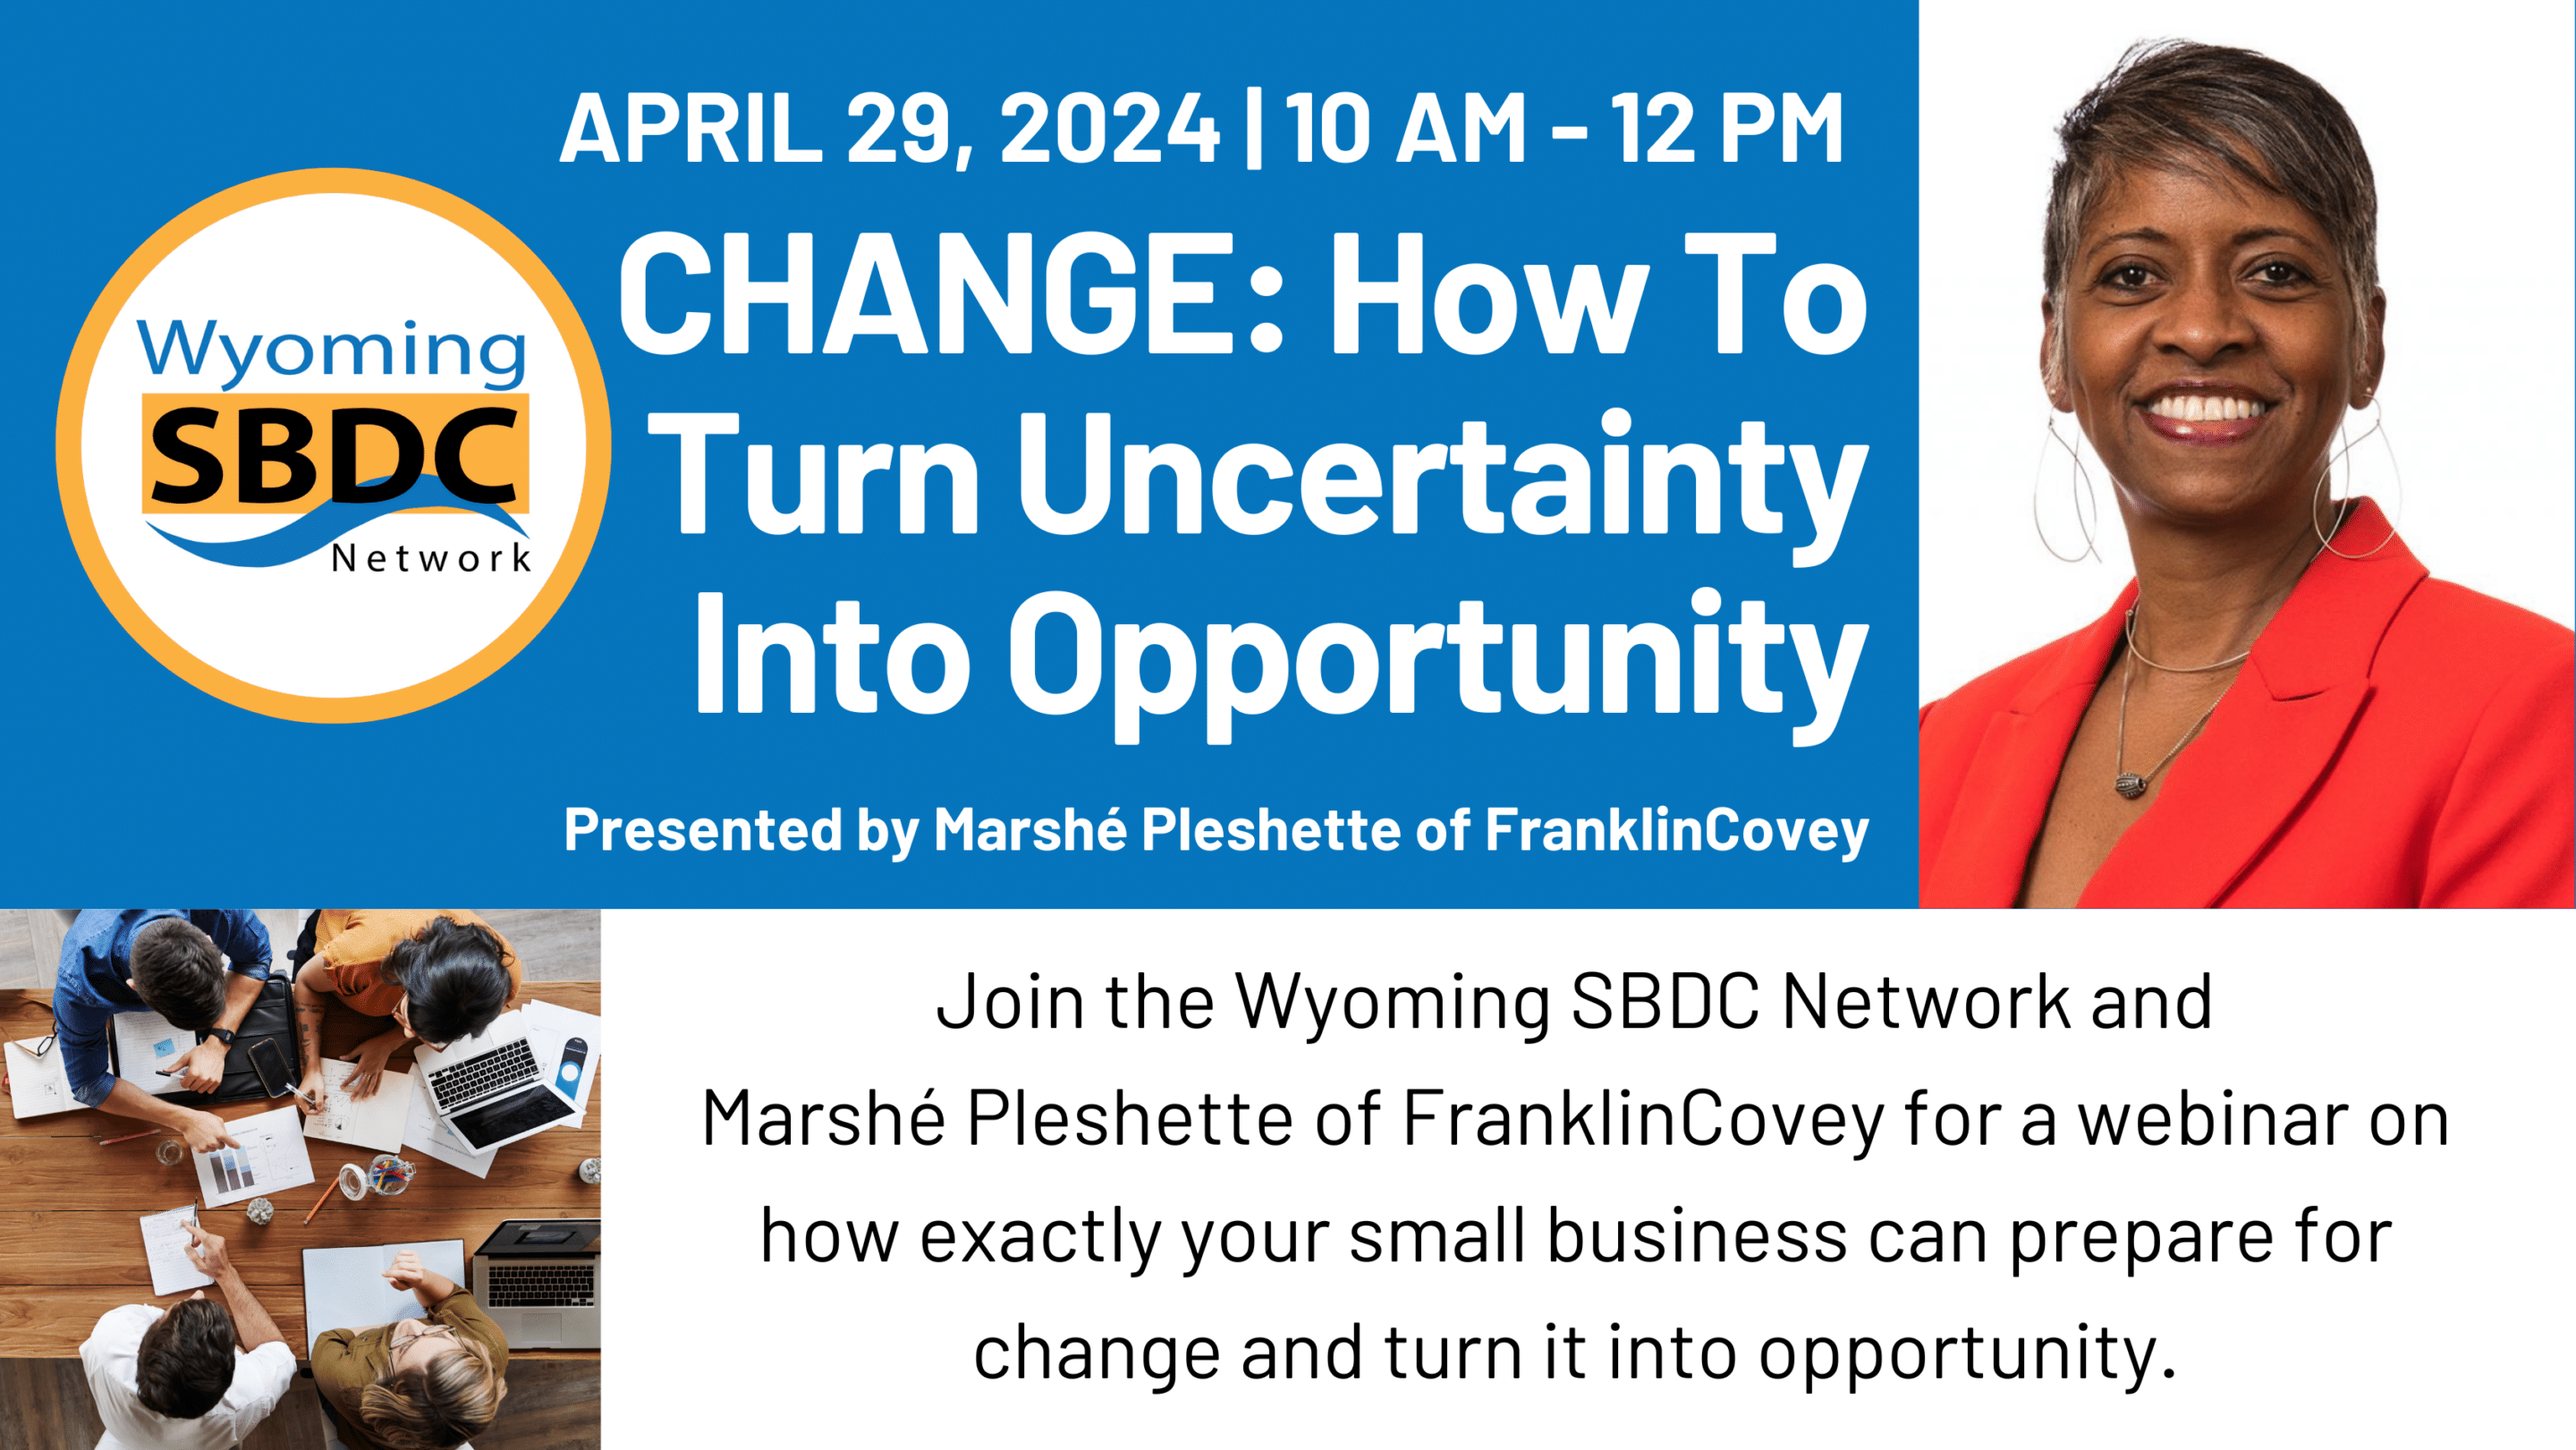 CHANGE: How To Turn Uncertainty Into Opportunity